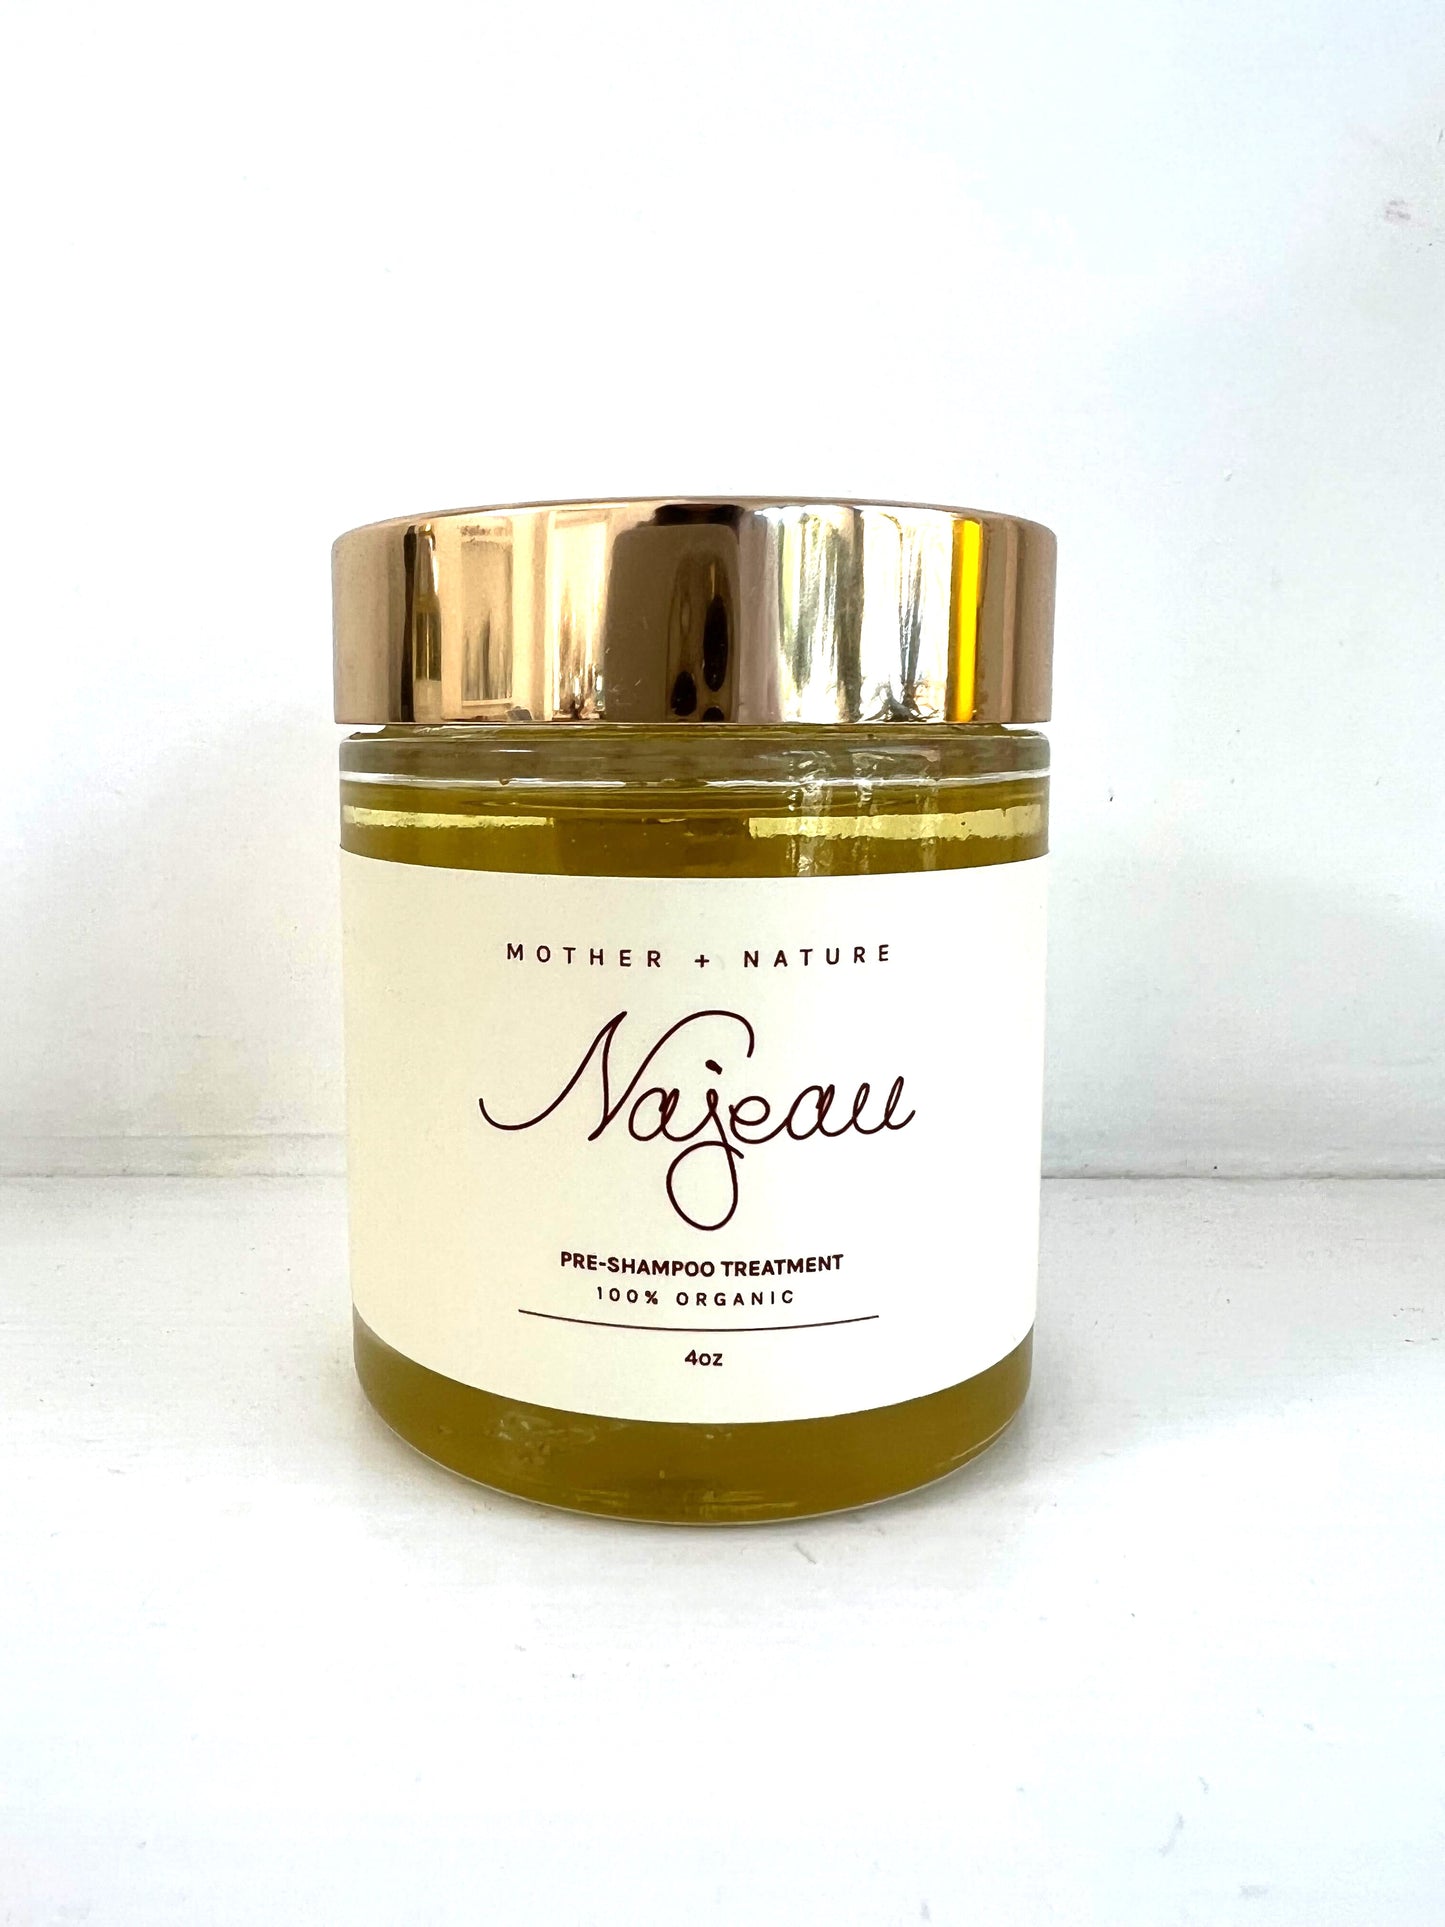 Najeau Scalp Treatment container with brass top and golden liquid.